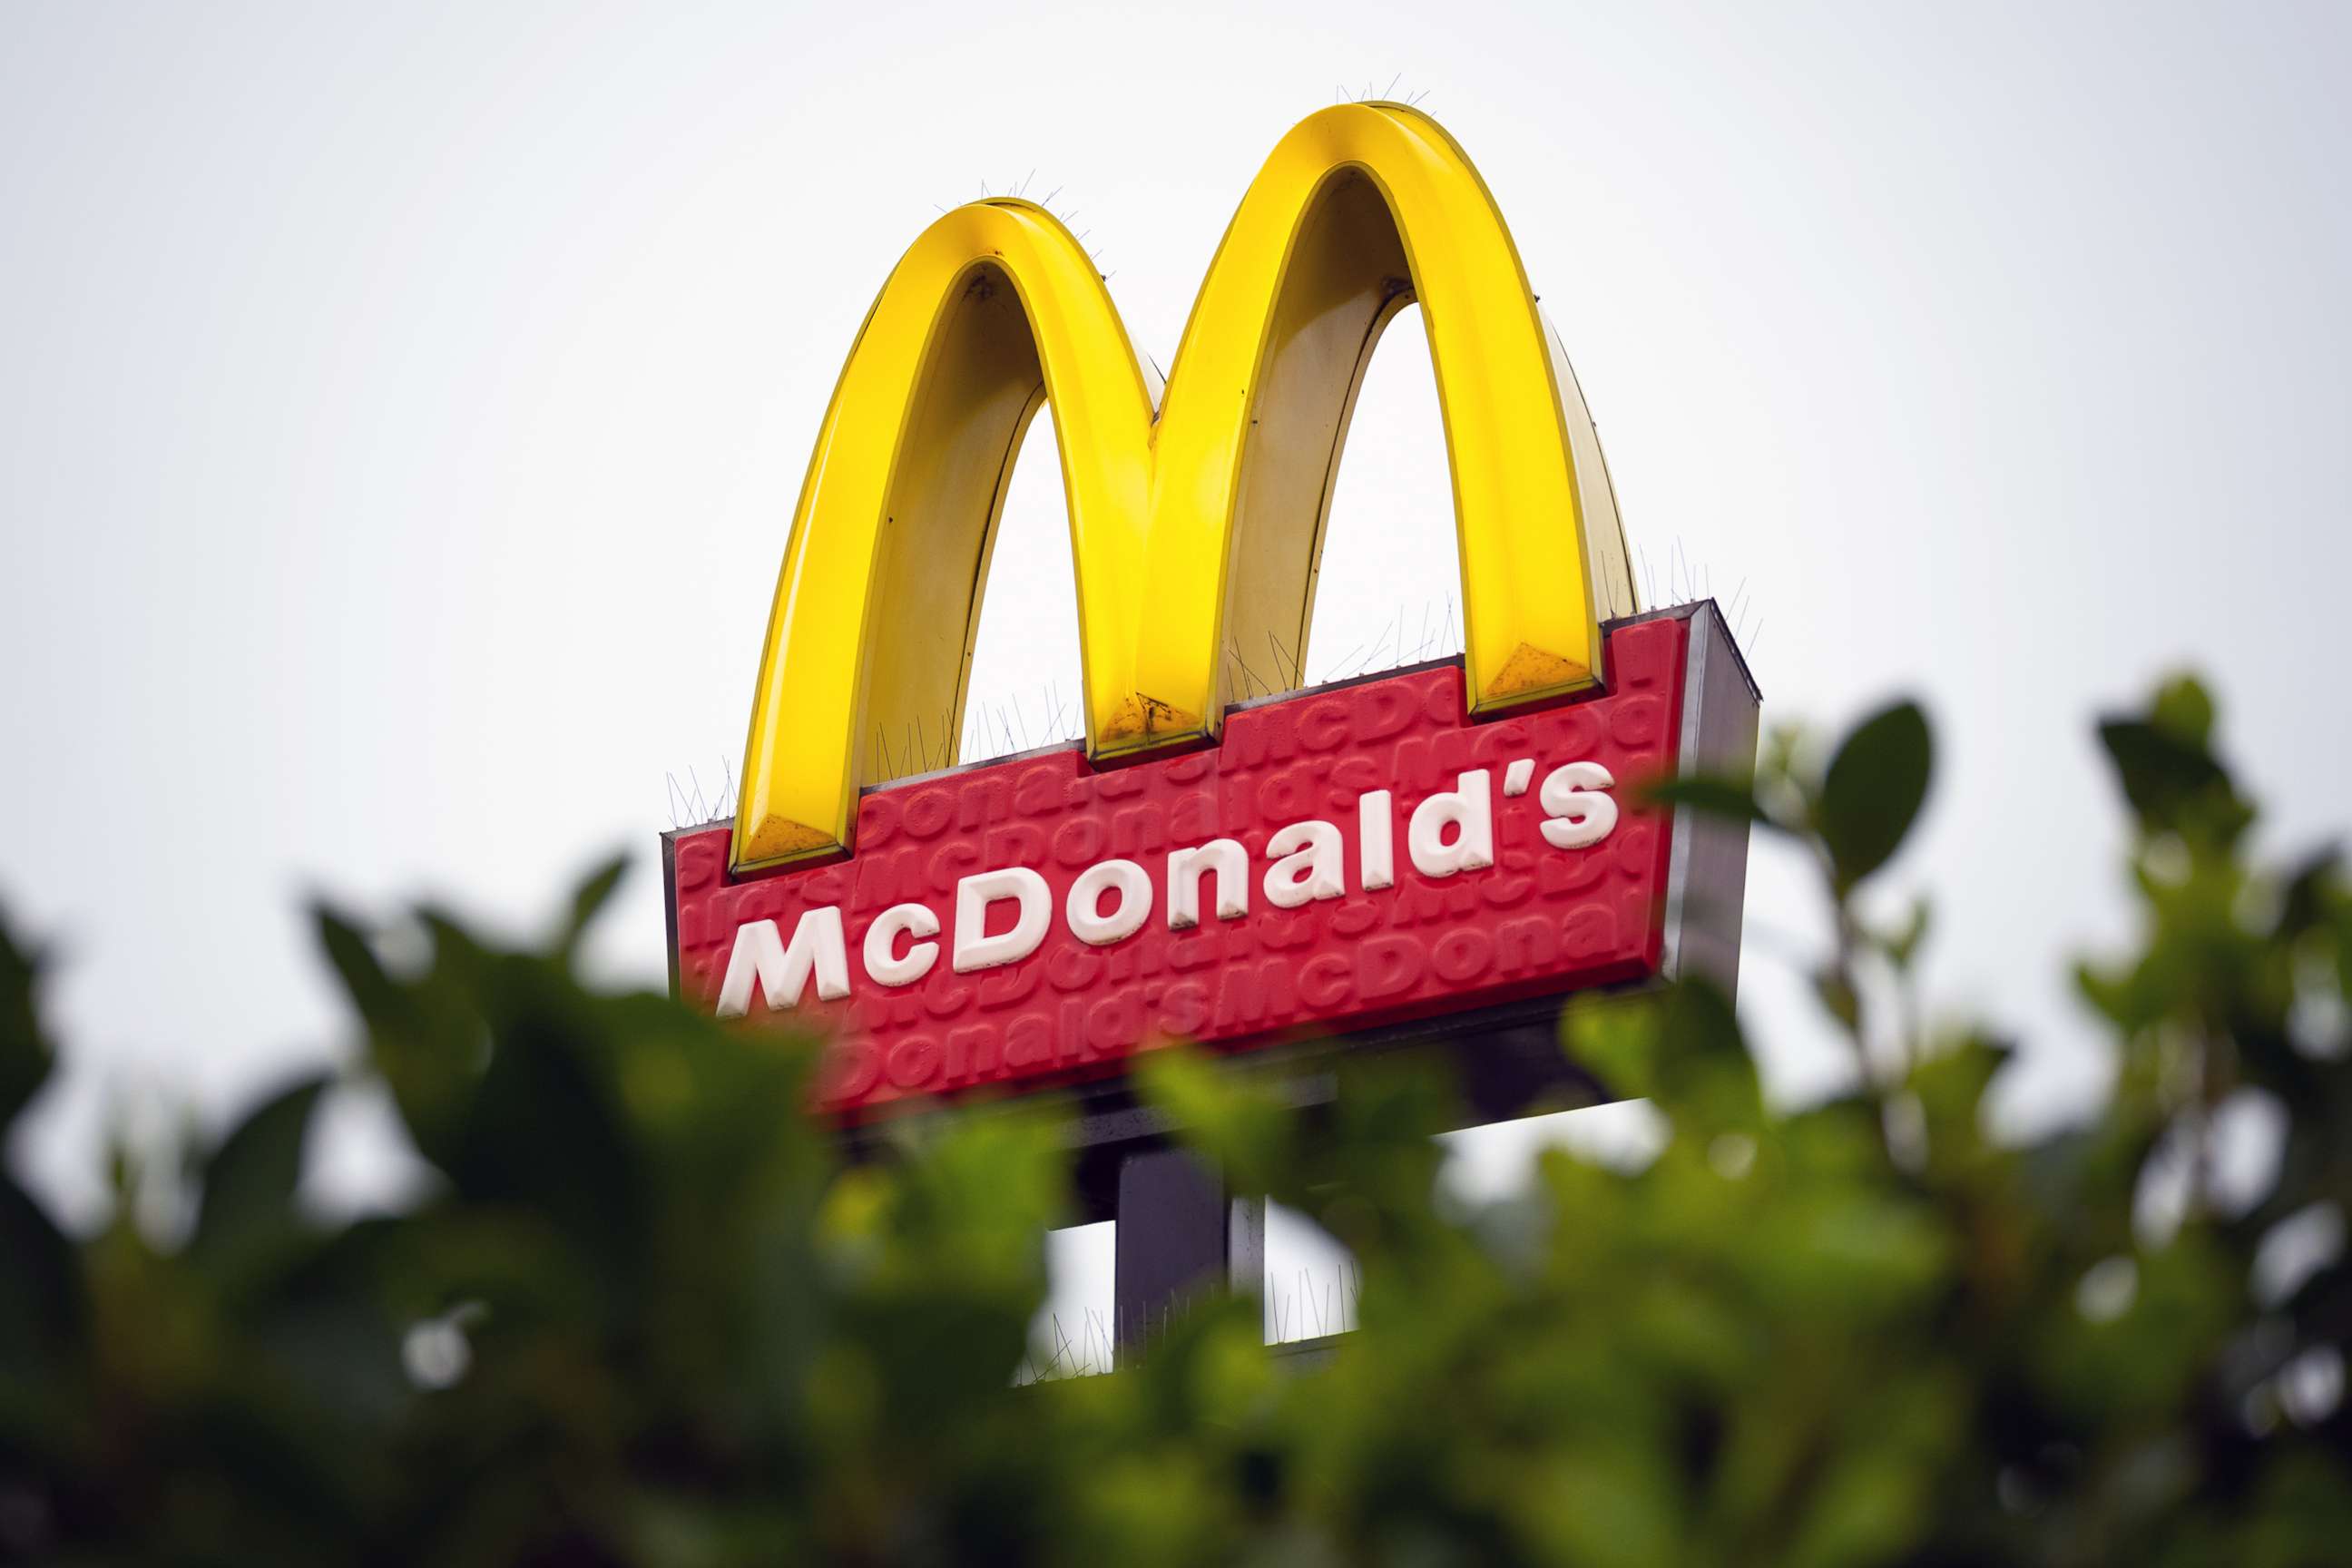 PHOTO: A close-up of a Mcdonald's fast food restaurant sign on March 18, 2020 in Cardiff, United Kingdom.